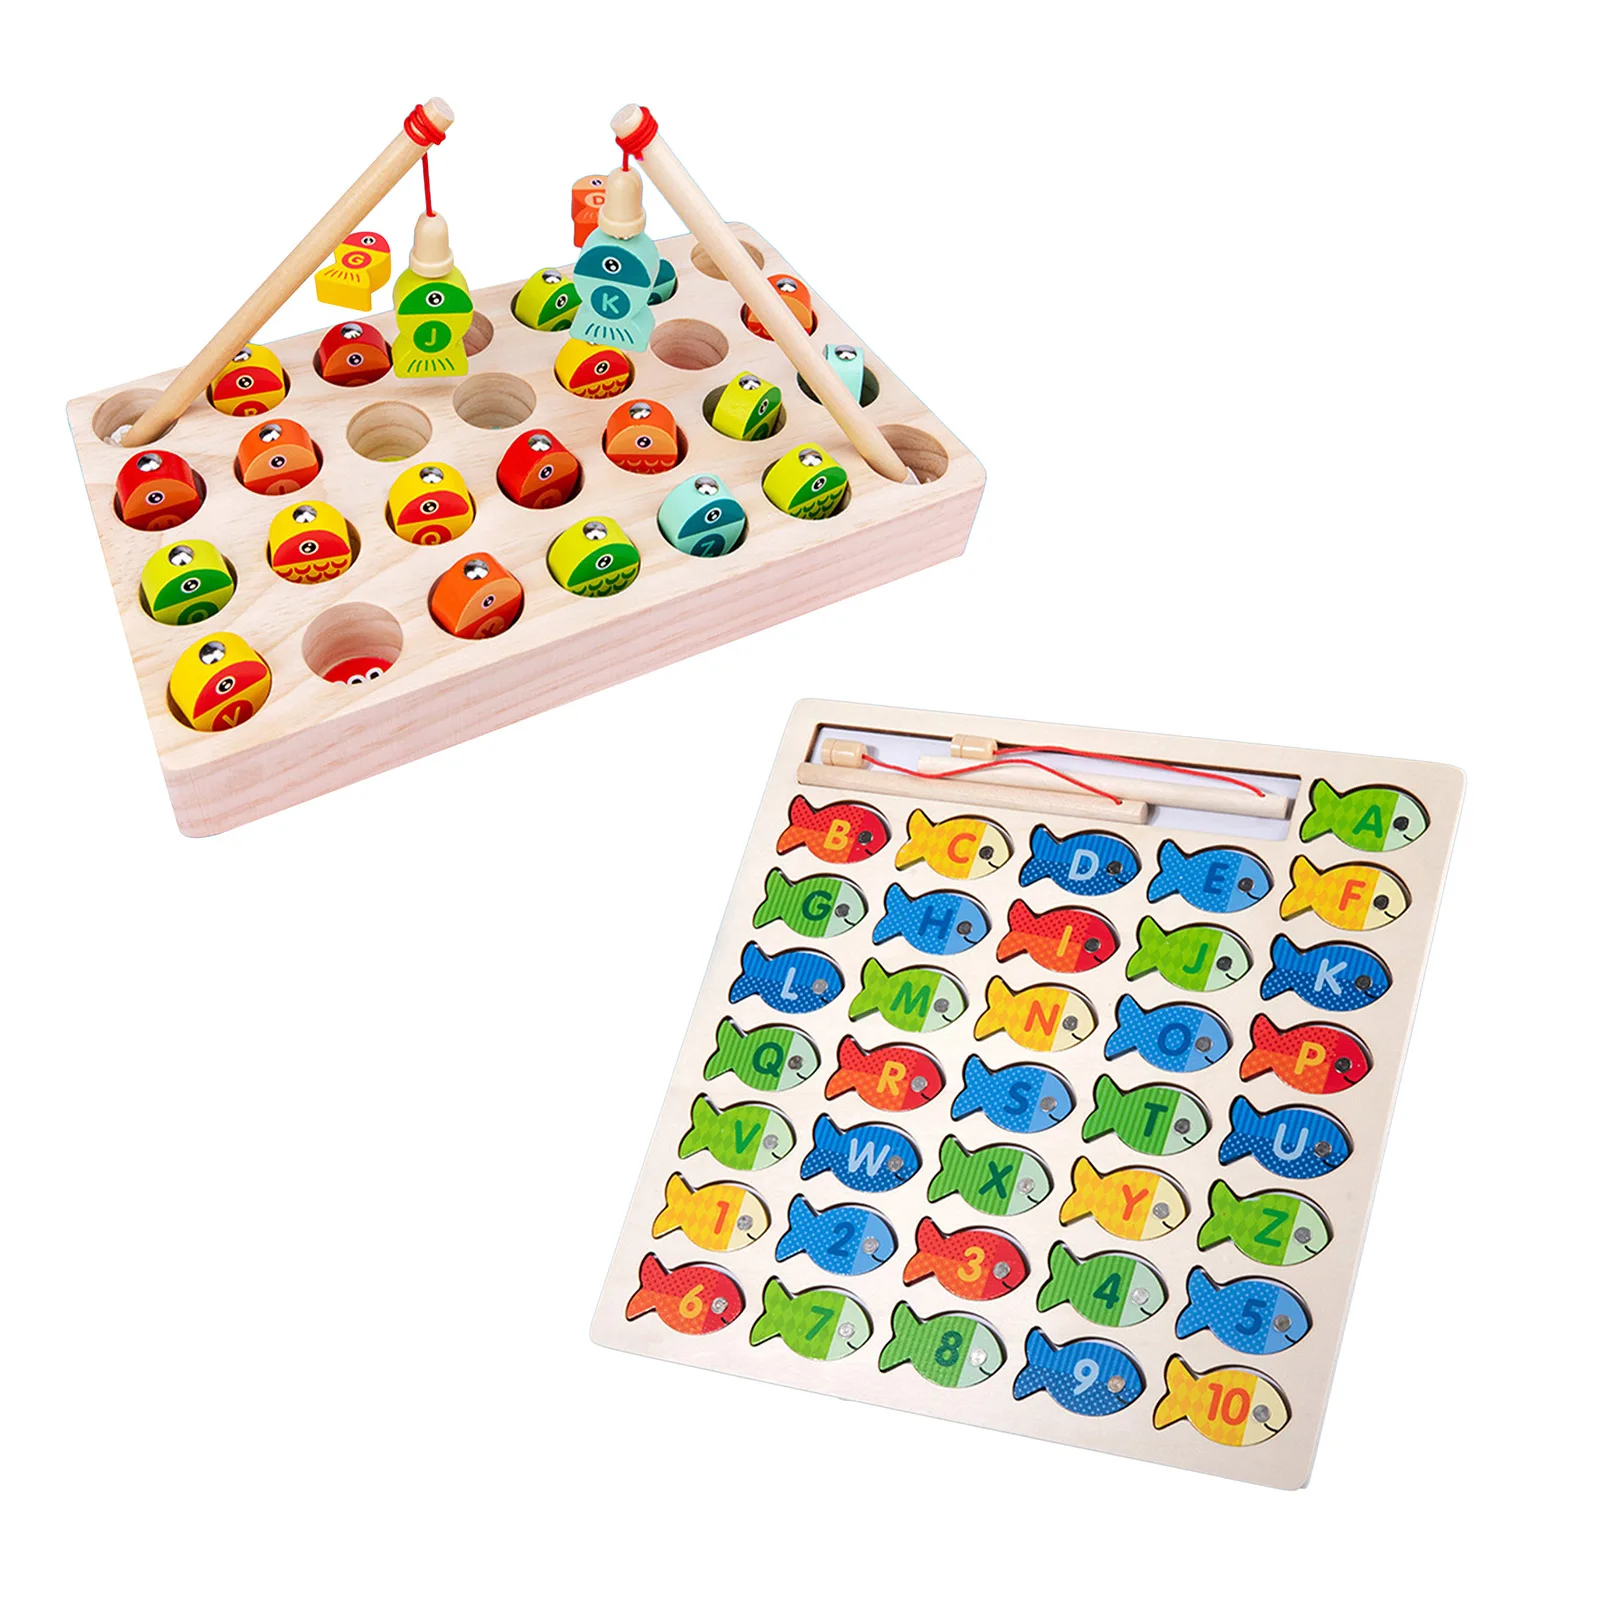 

Magnetic Wood Fishing Game Toy For Toddlers Alphabet Fish Catching Counting Preschool Board Games Puzzle Games With Numbers And